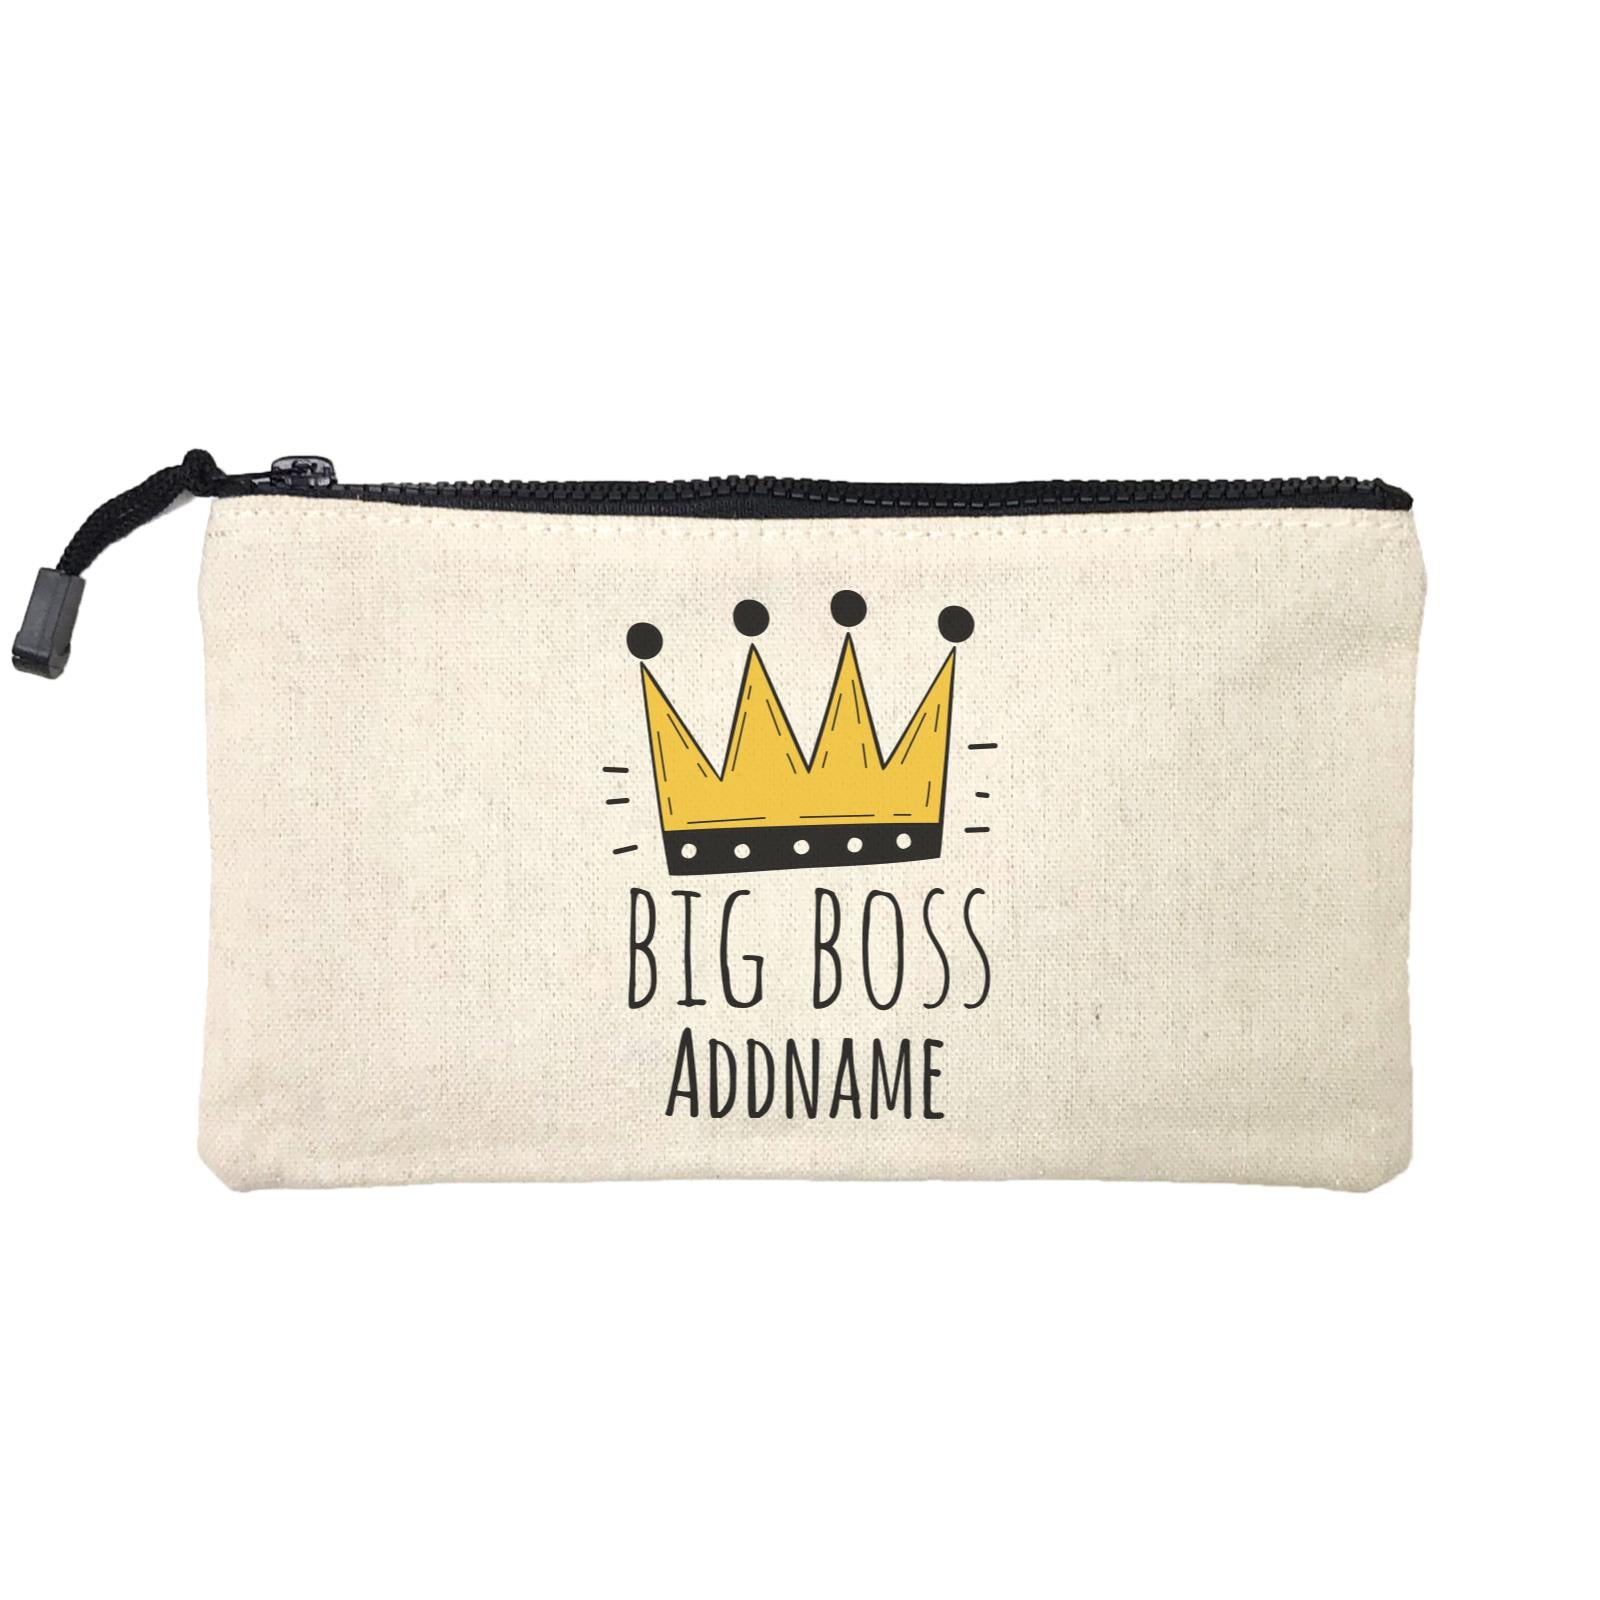 Drawn Crown Big Boss Addname Mini Accessories Stationery Pouch